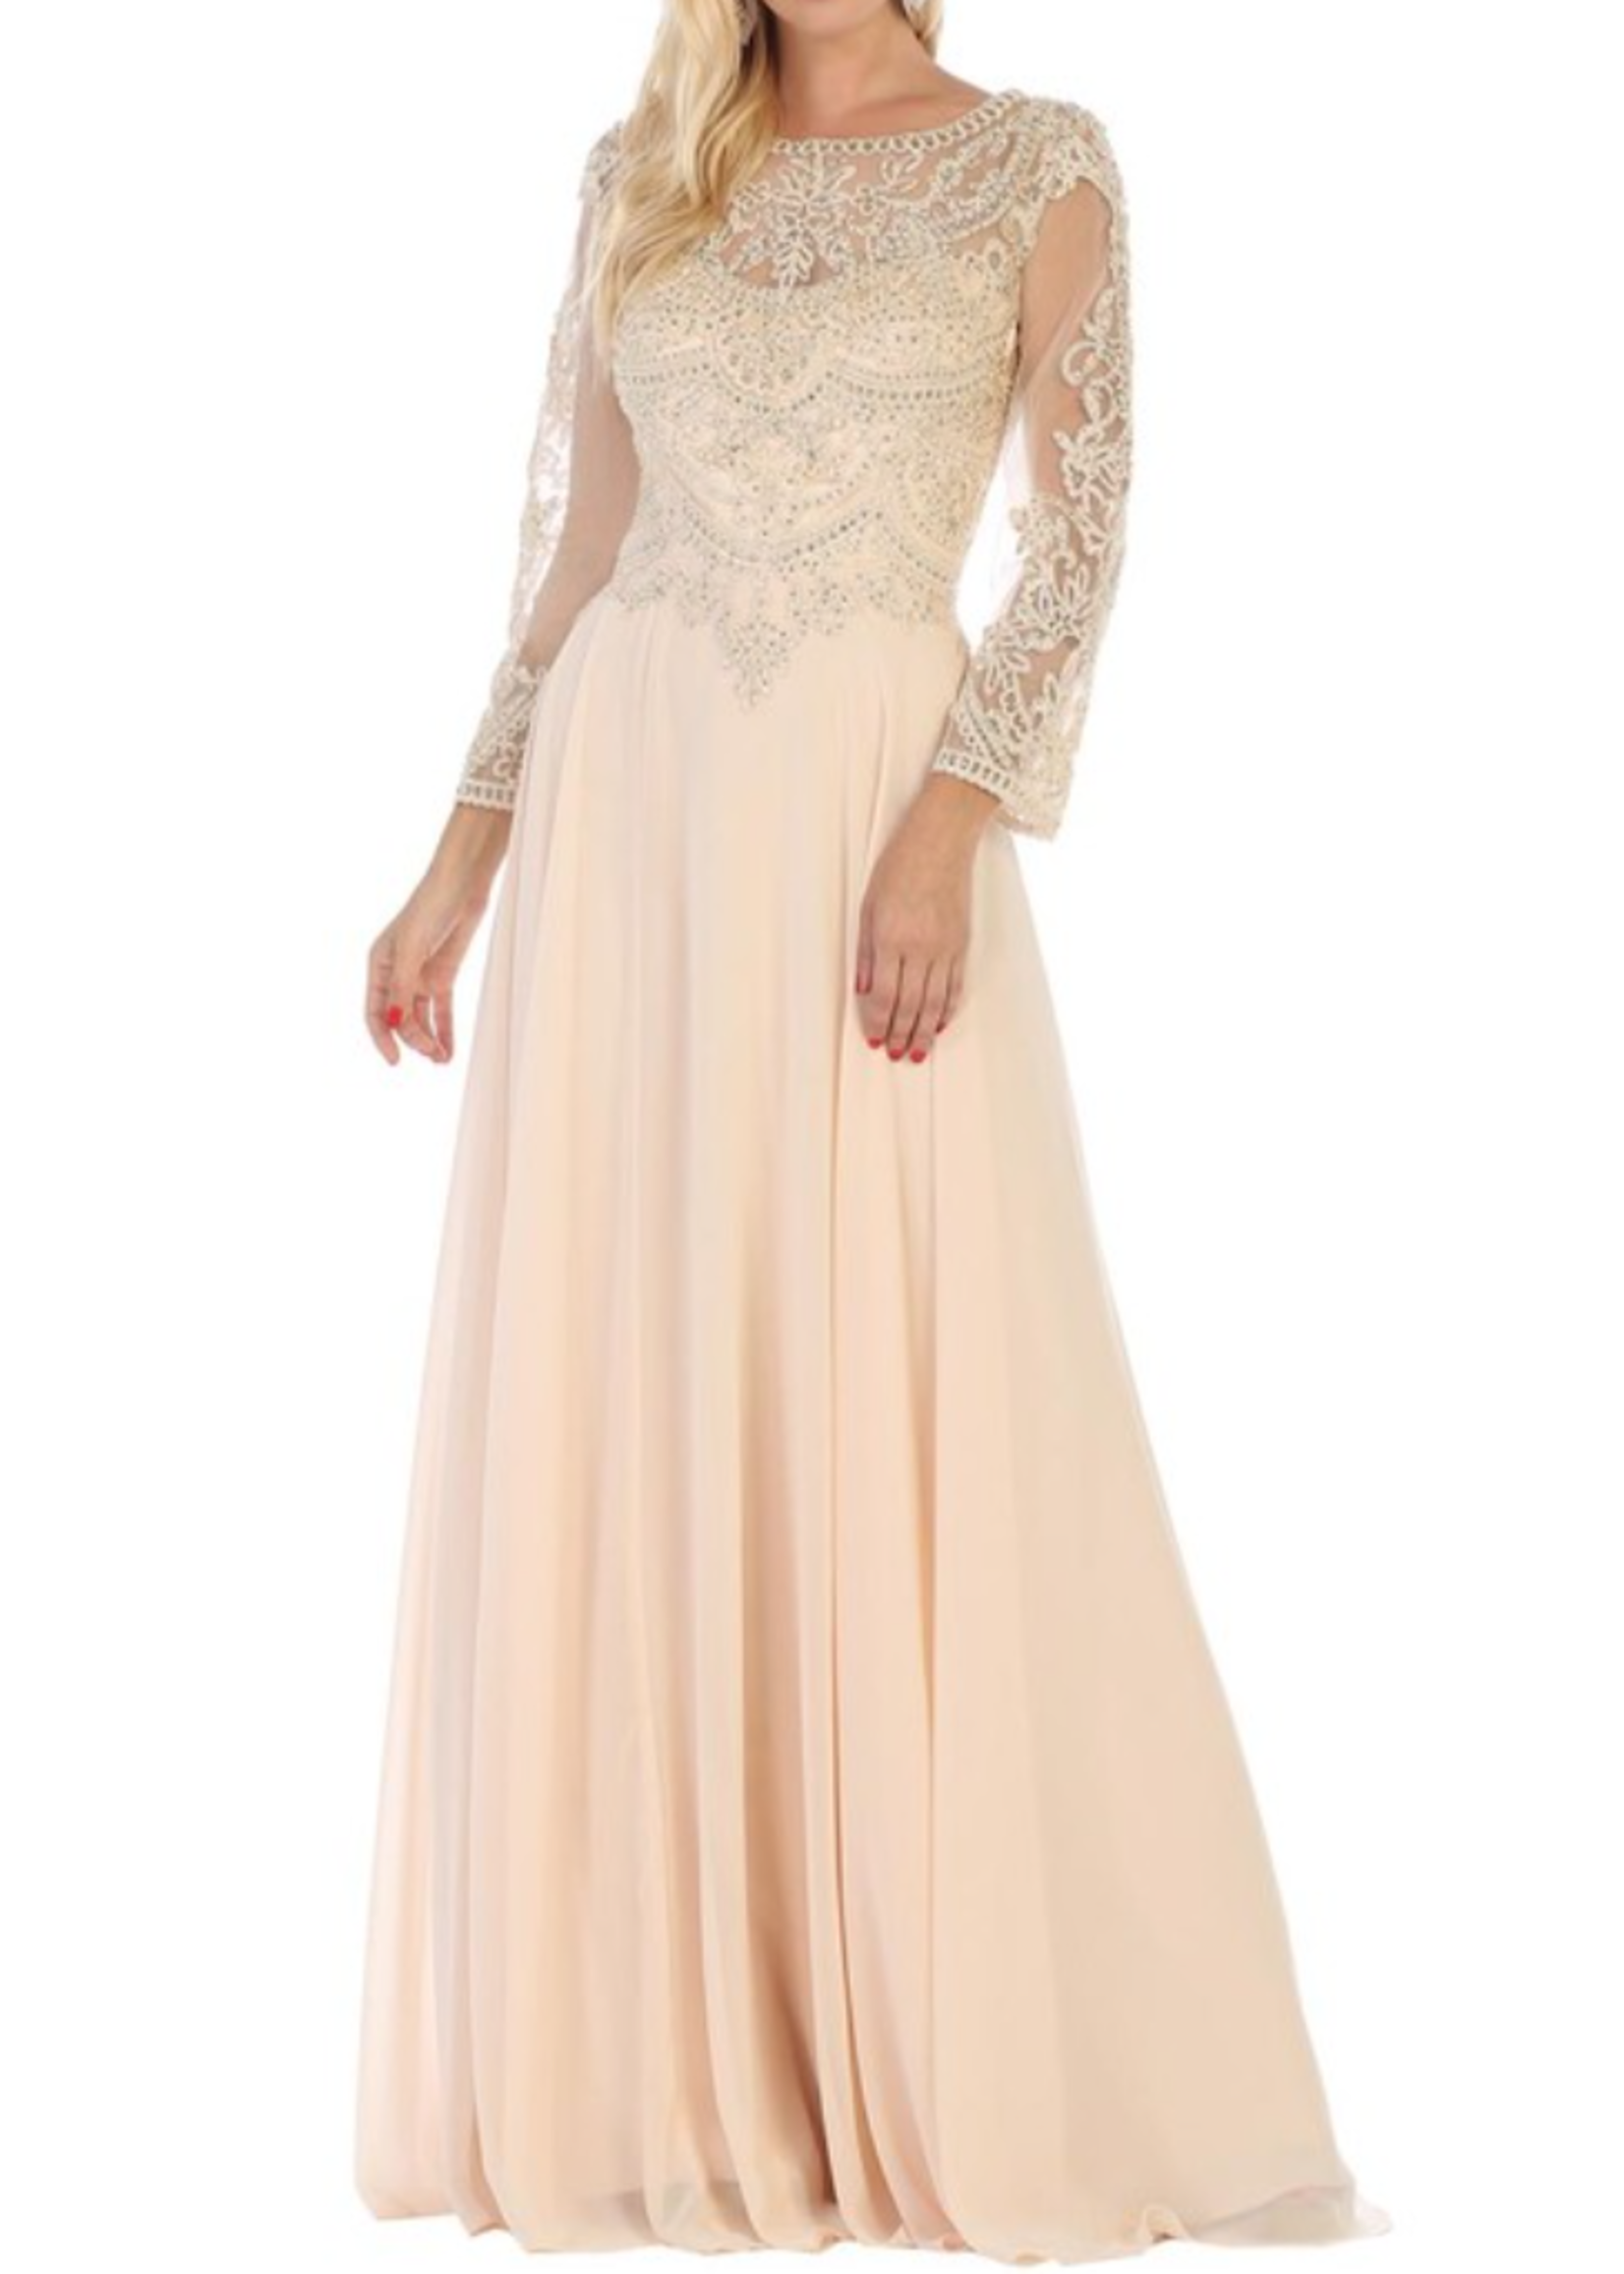 MQMQ1615 - SLEEVED MOB GOWN